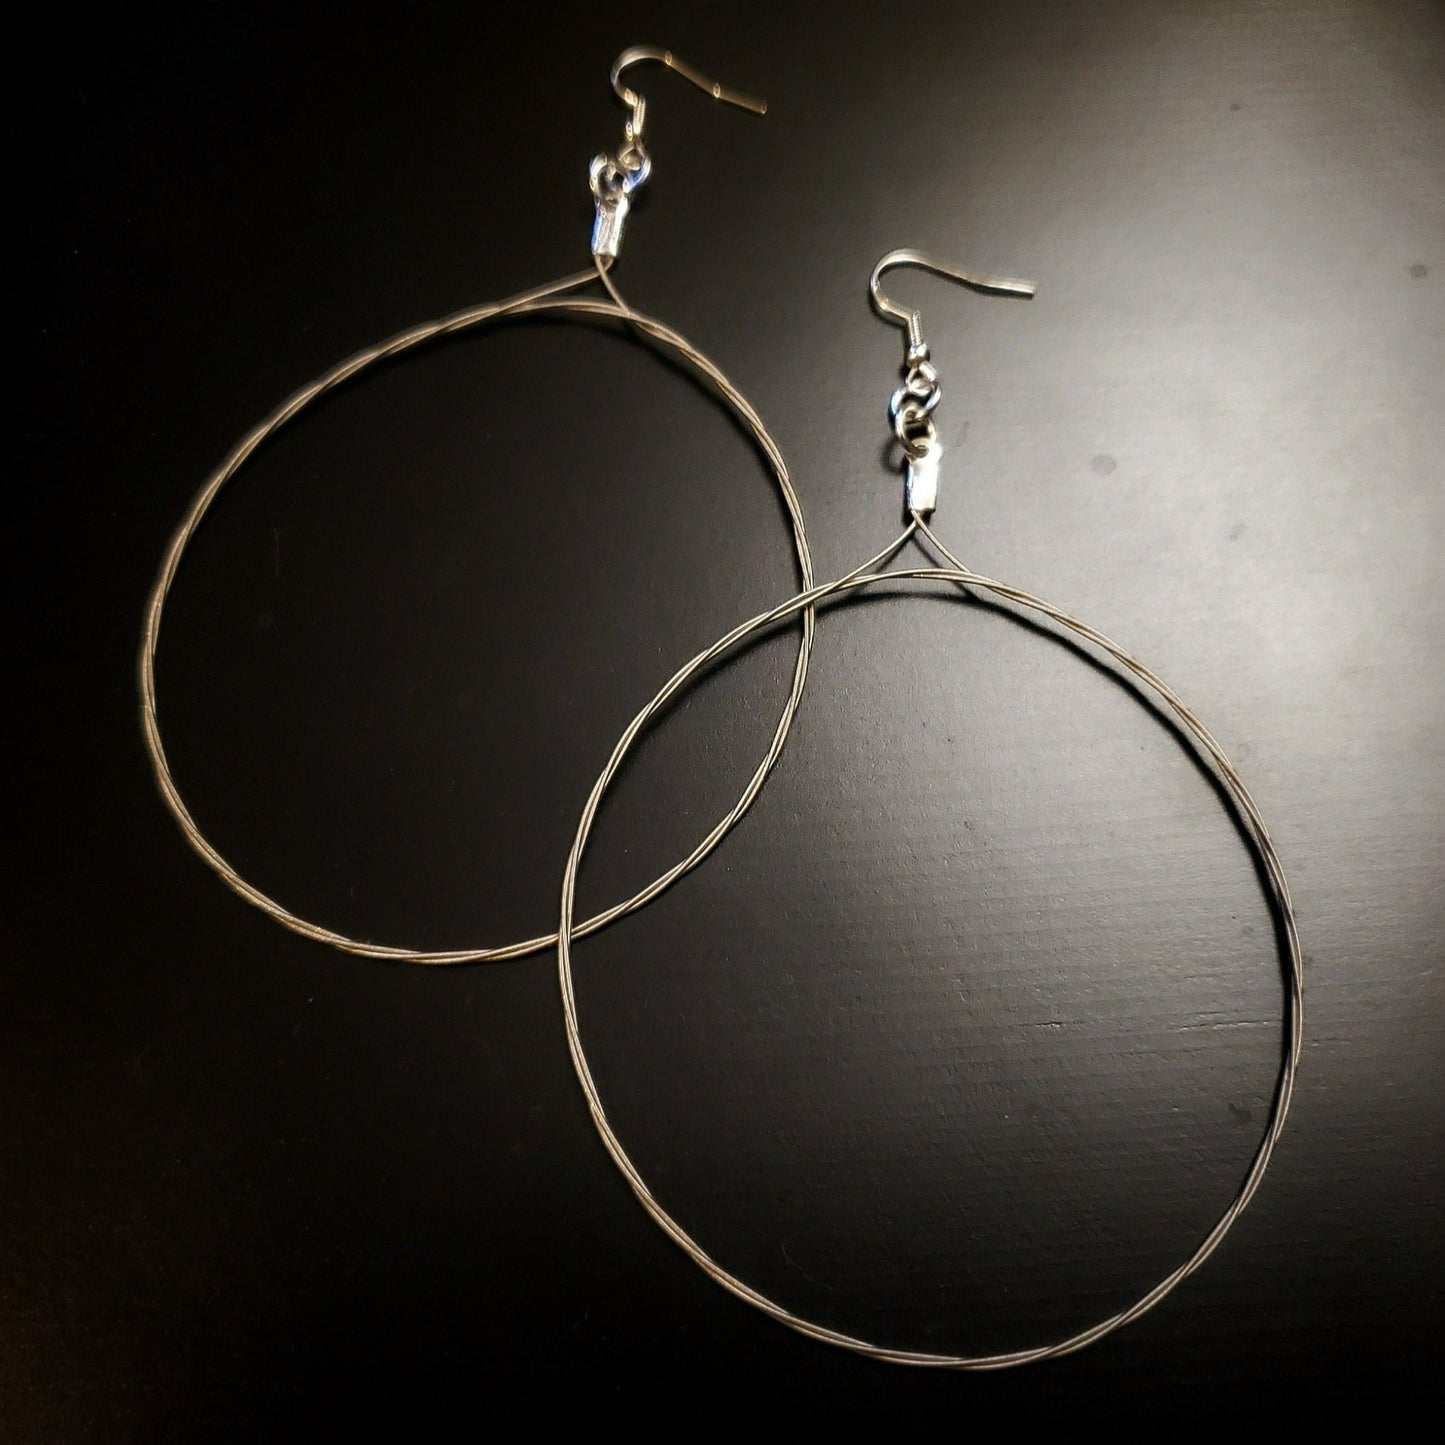 pair of large hoop style earrings made from upcycled guitar strings - black and grey background